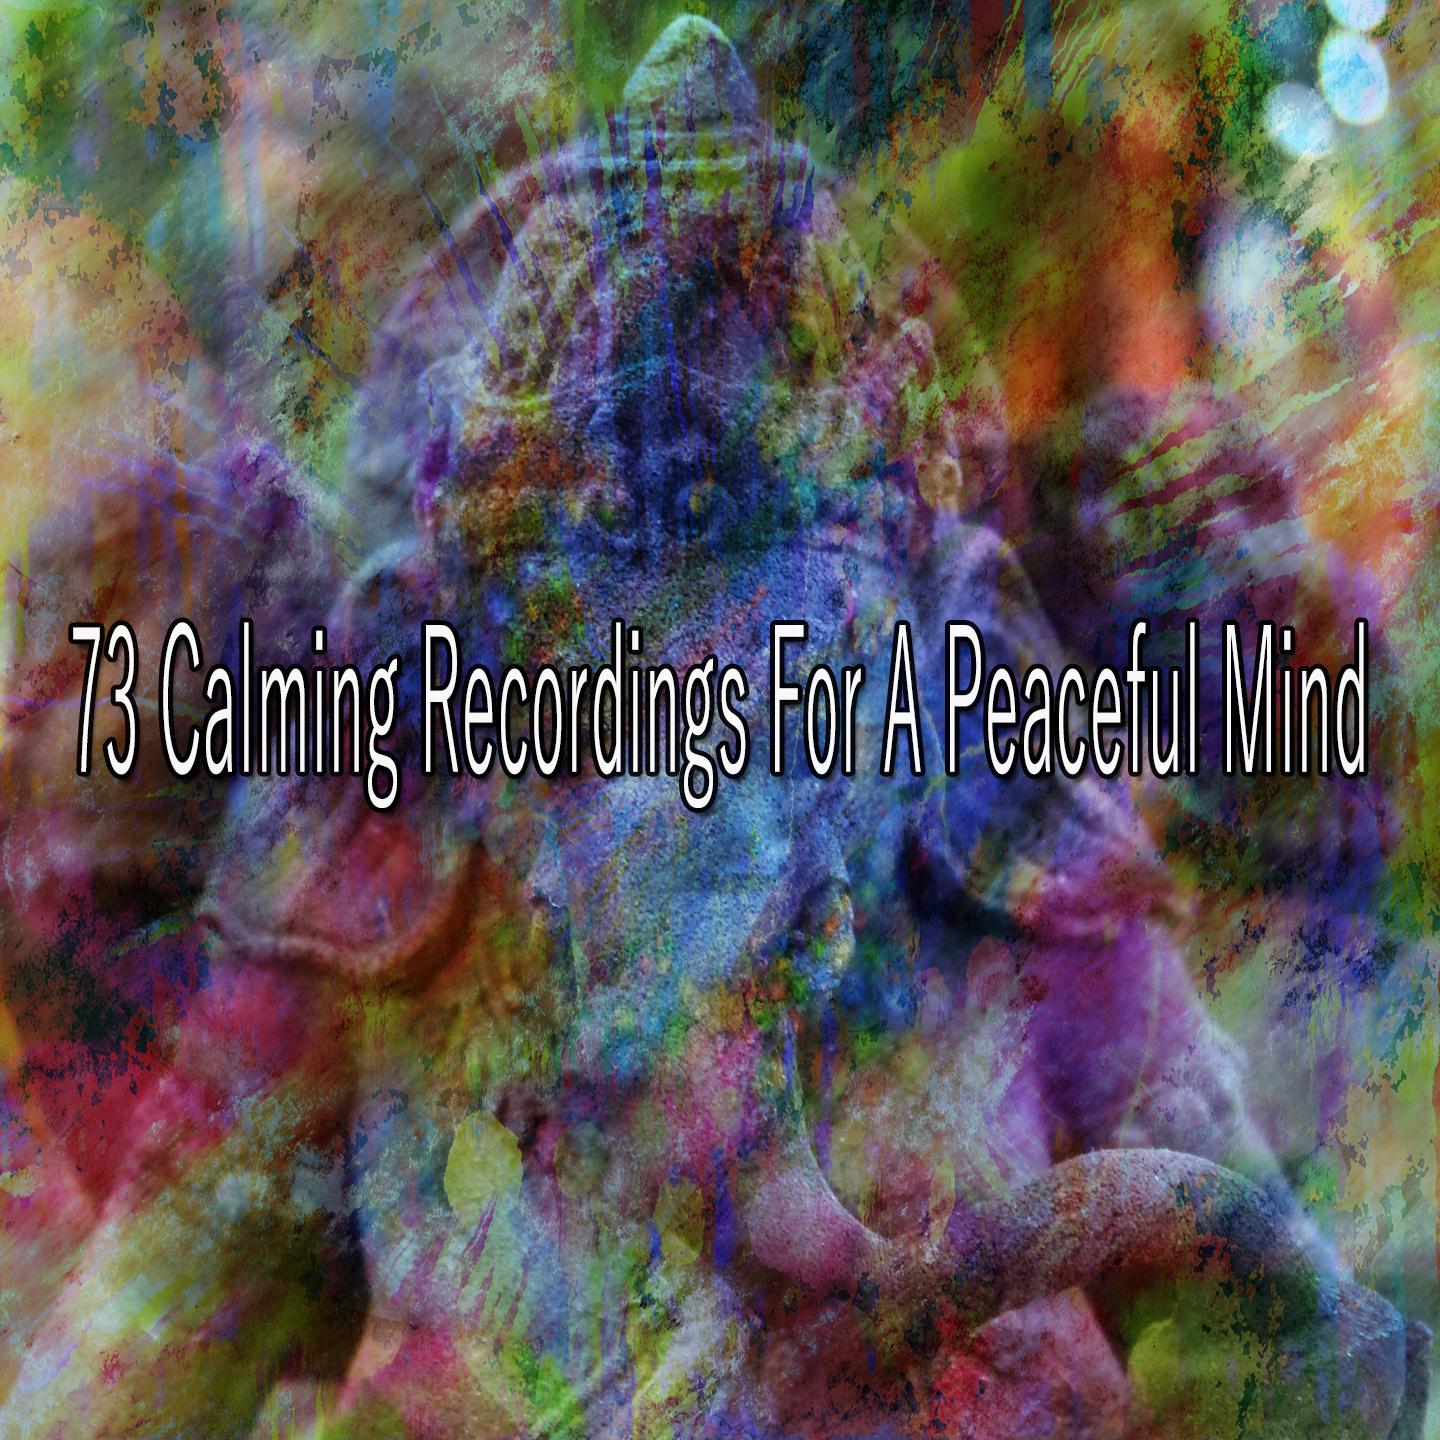 73 Calming Recordings for a Peaceful Mind